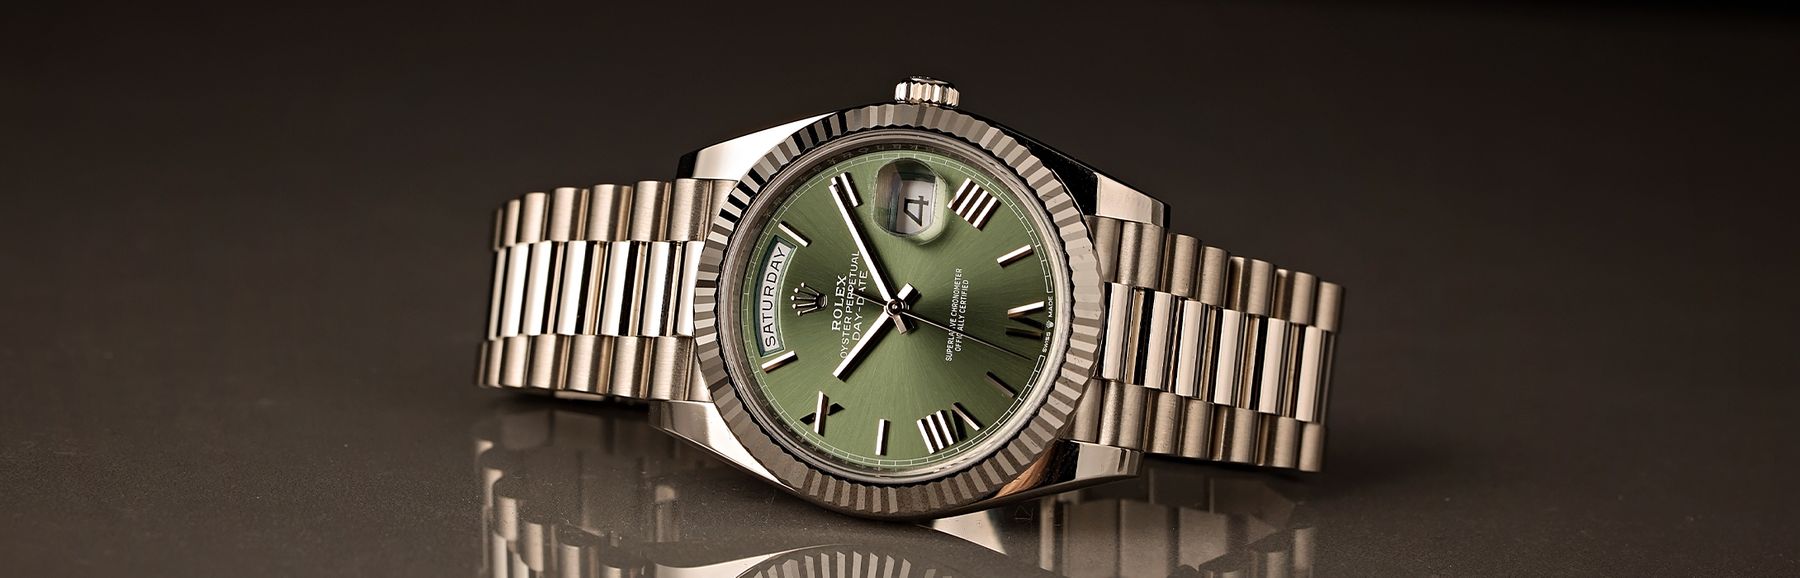 Luxury Watch Brands Are Showing How Circularity And Sustainability Can  Co-Exist